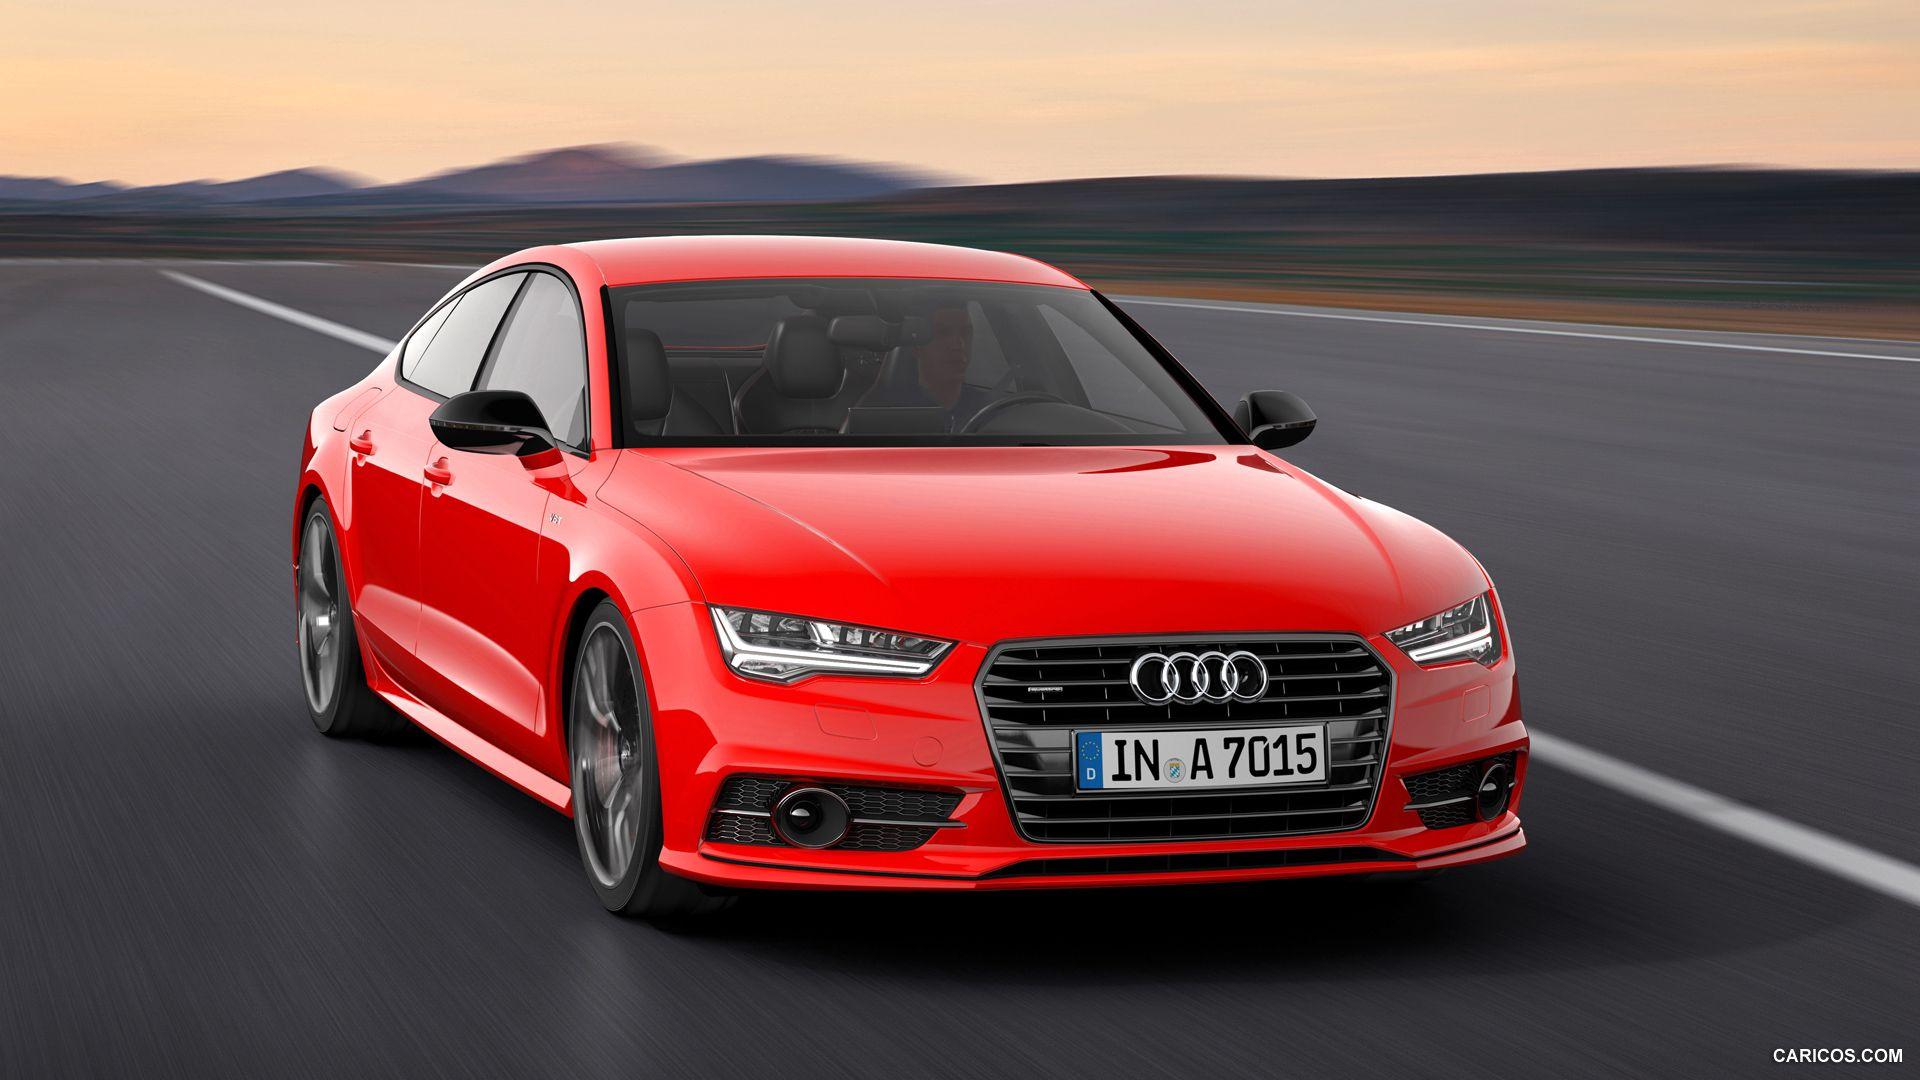 Red Audi A7 Wallpapers Top Free Red Audi A7 Backgrounds Wallpaperaccess